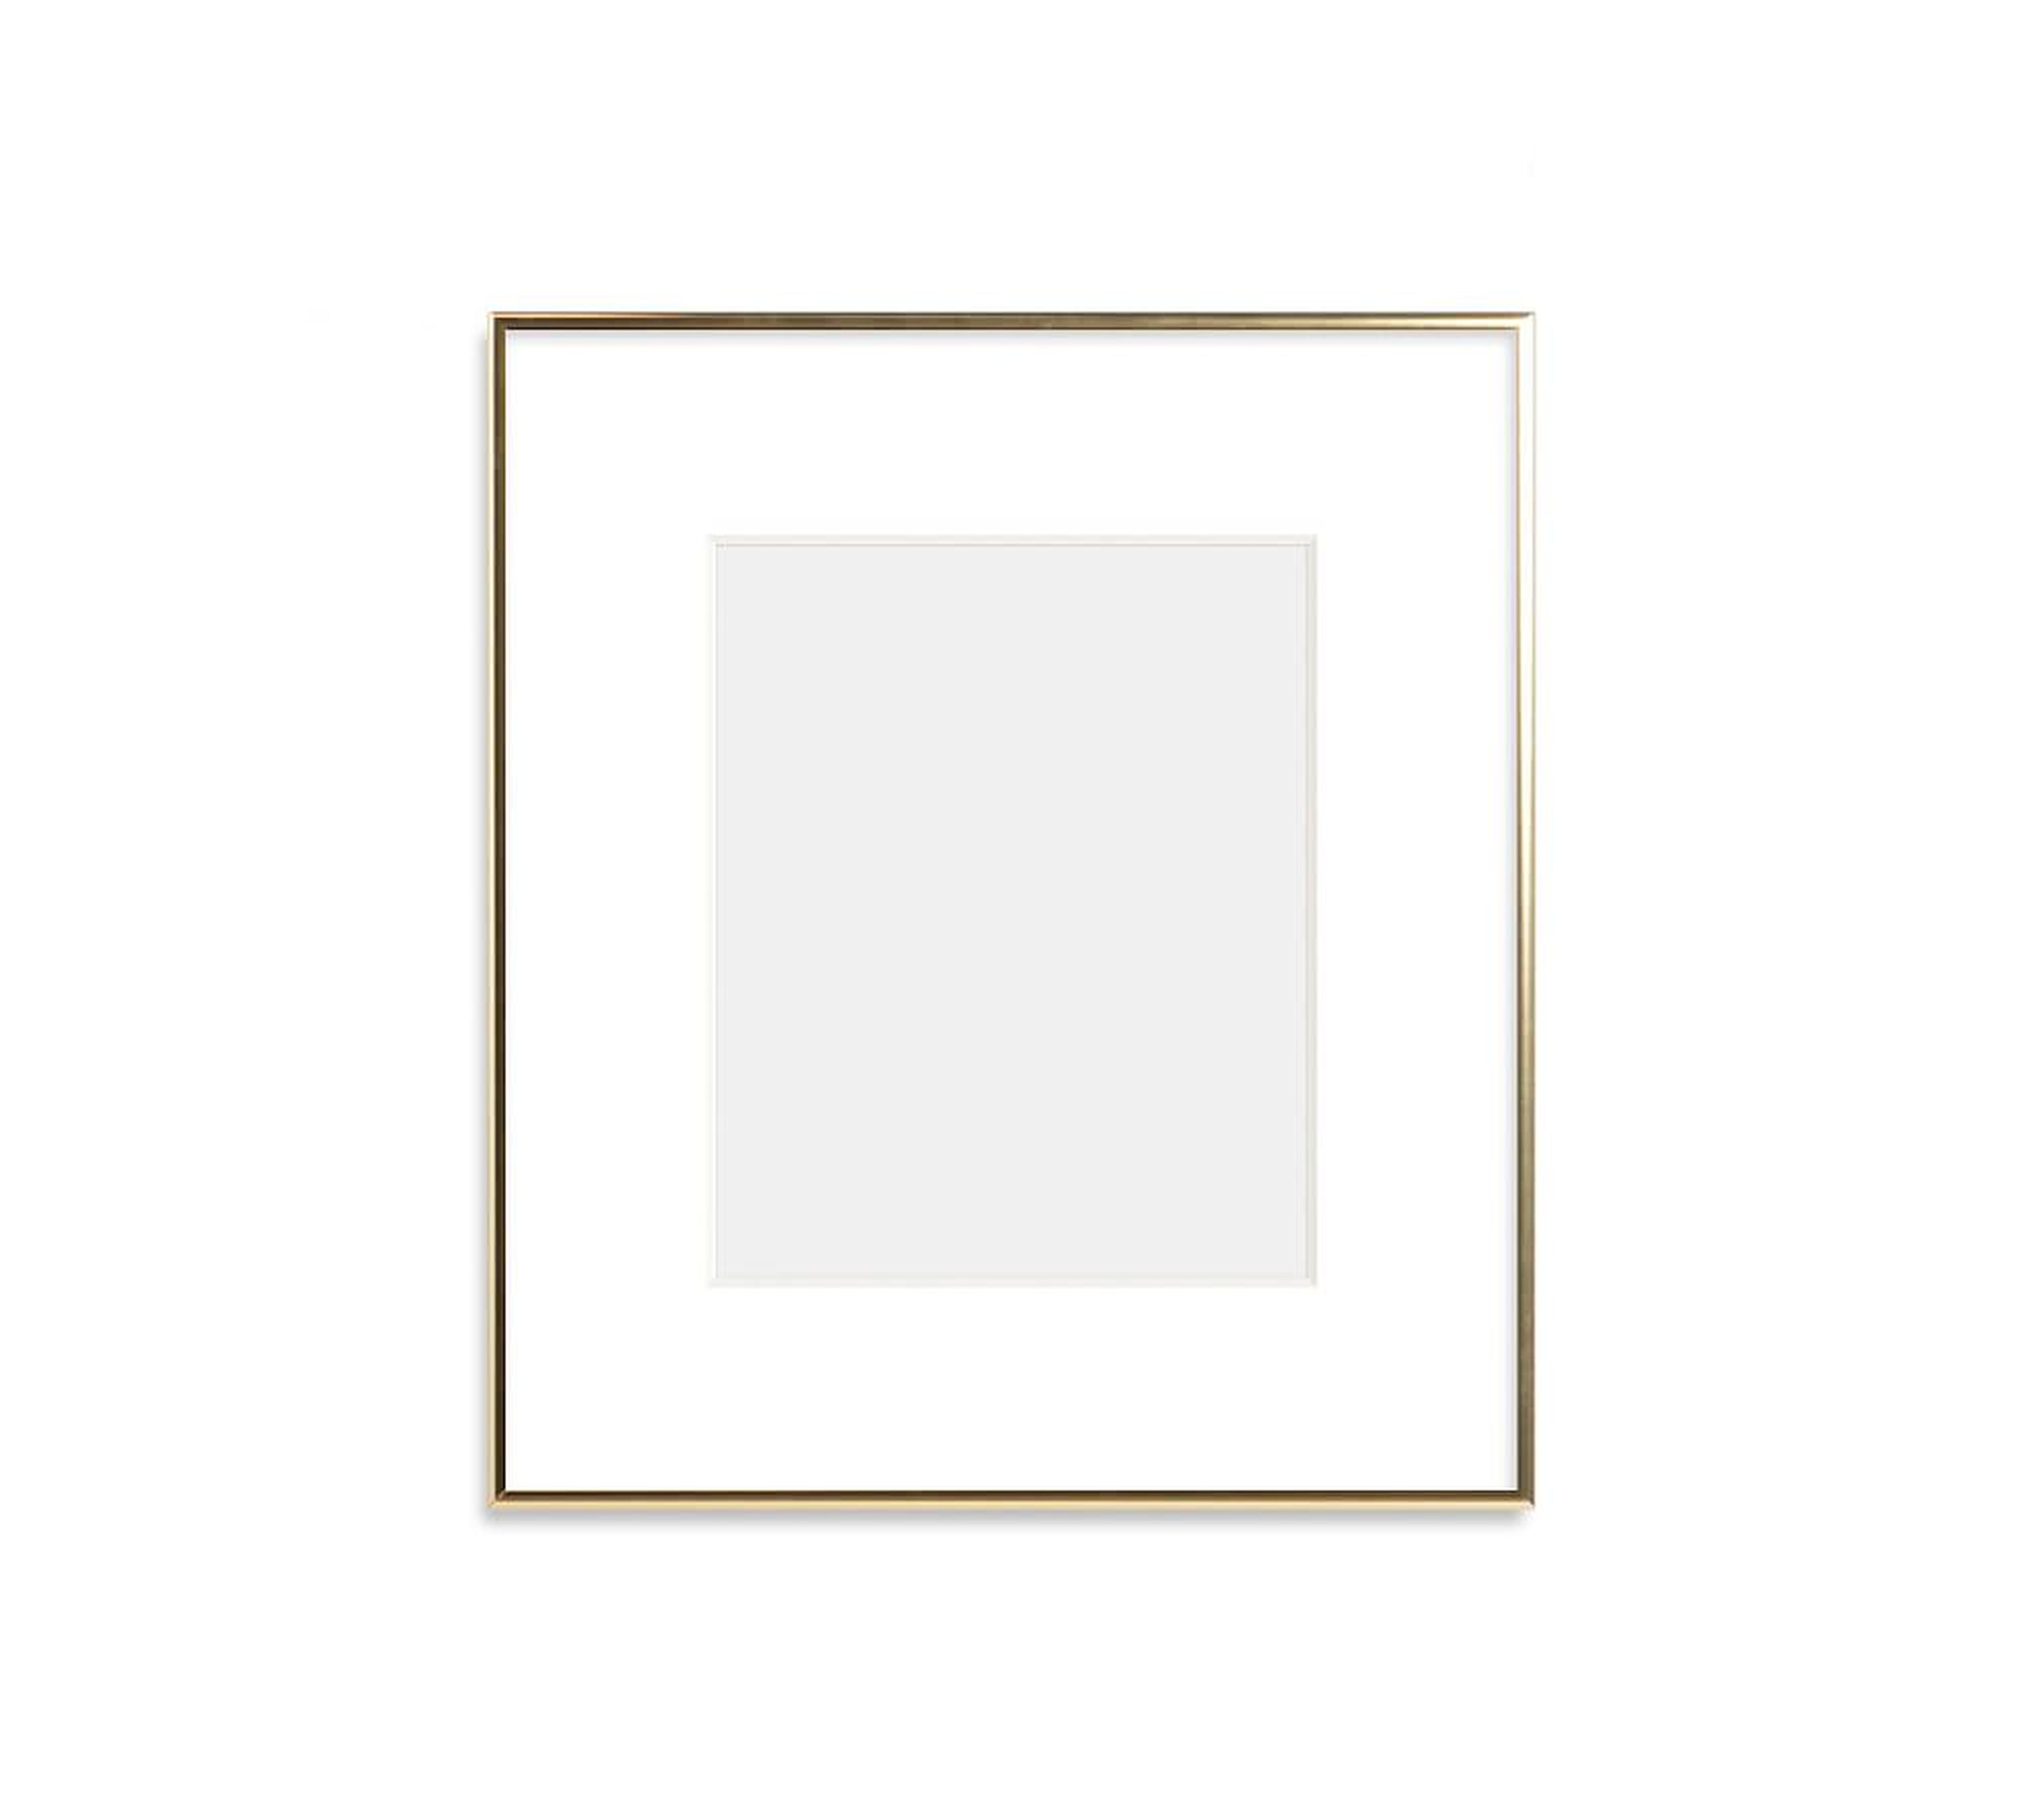 Thin Metal Gallery Frame, 3" Mat, 8x10 - Bright Gold - Pottery Barn